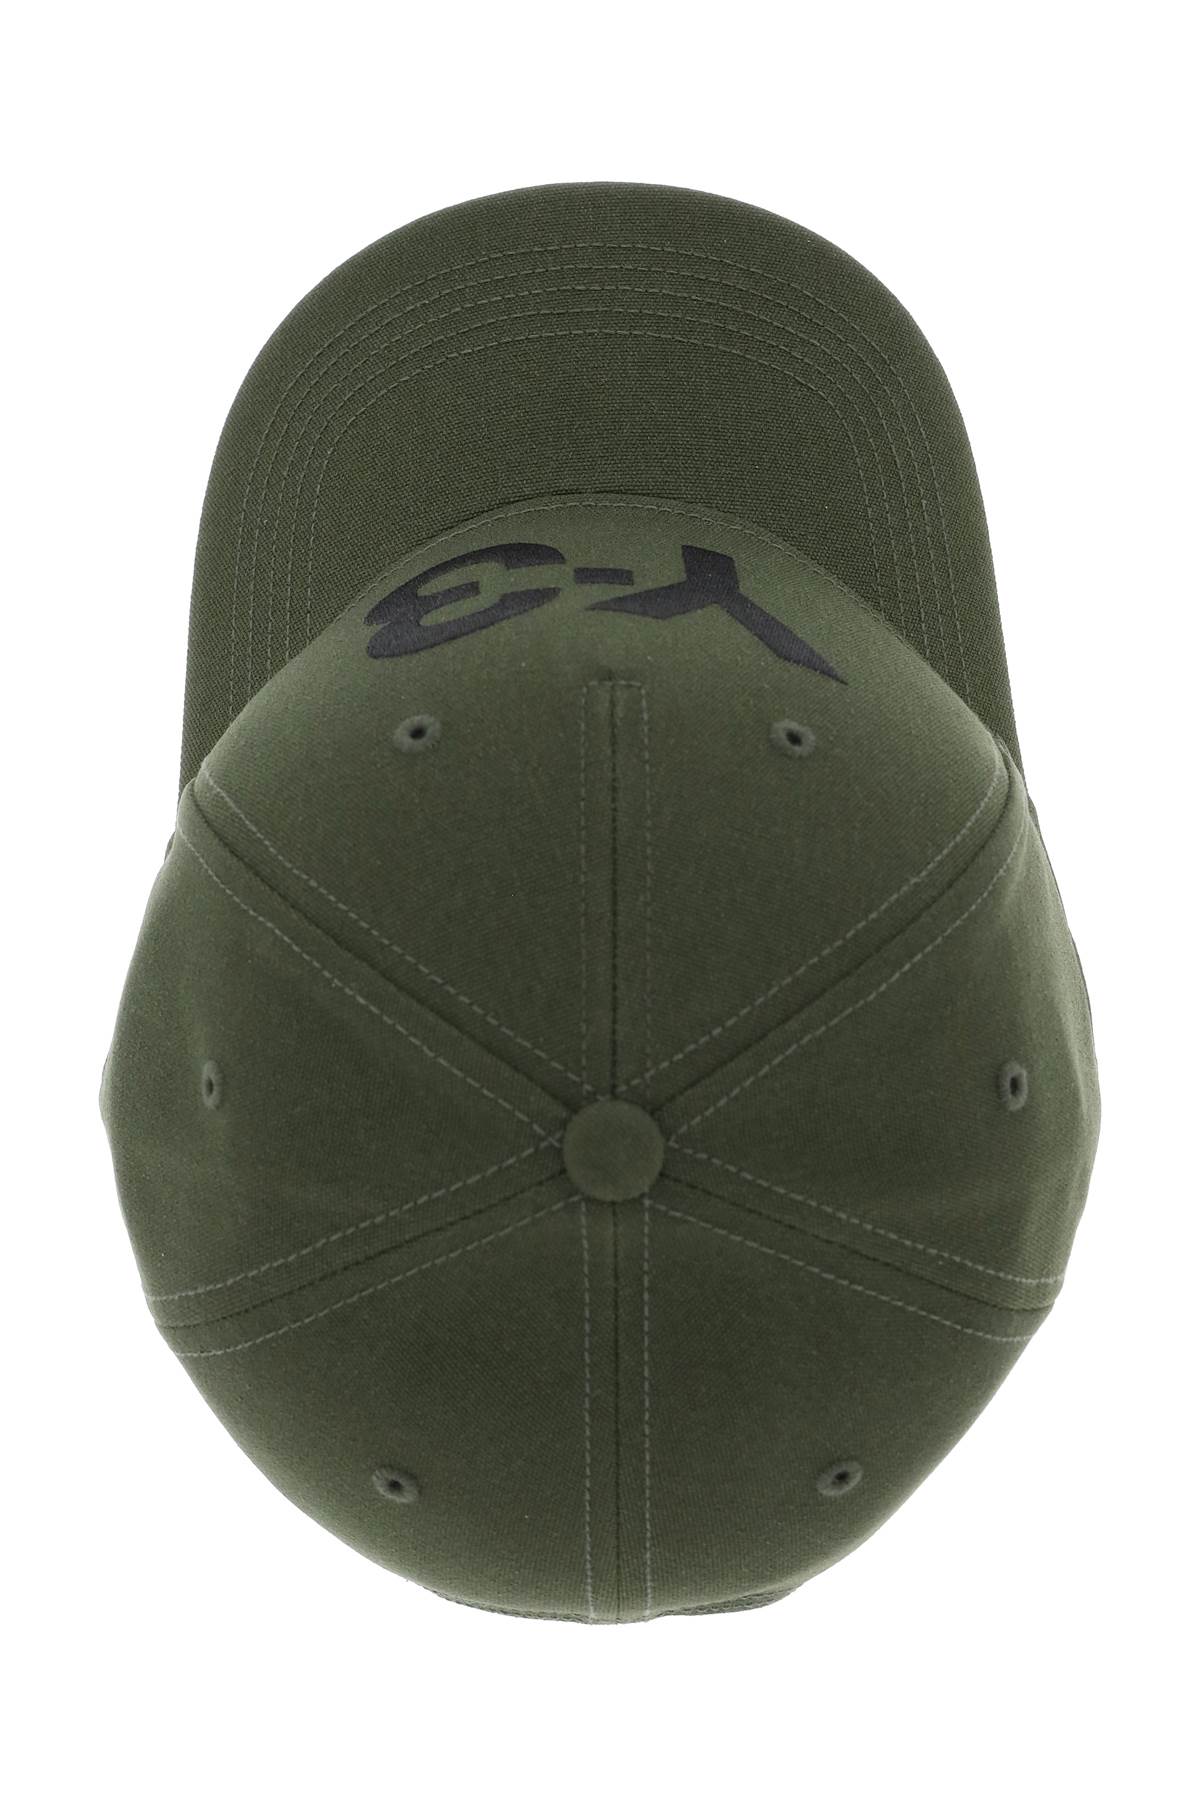 Y-3 baseball cap with logo embroidery-1